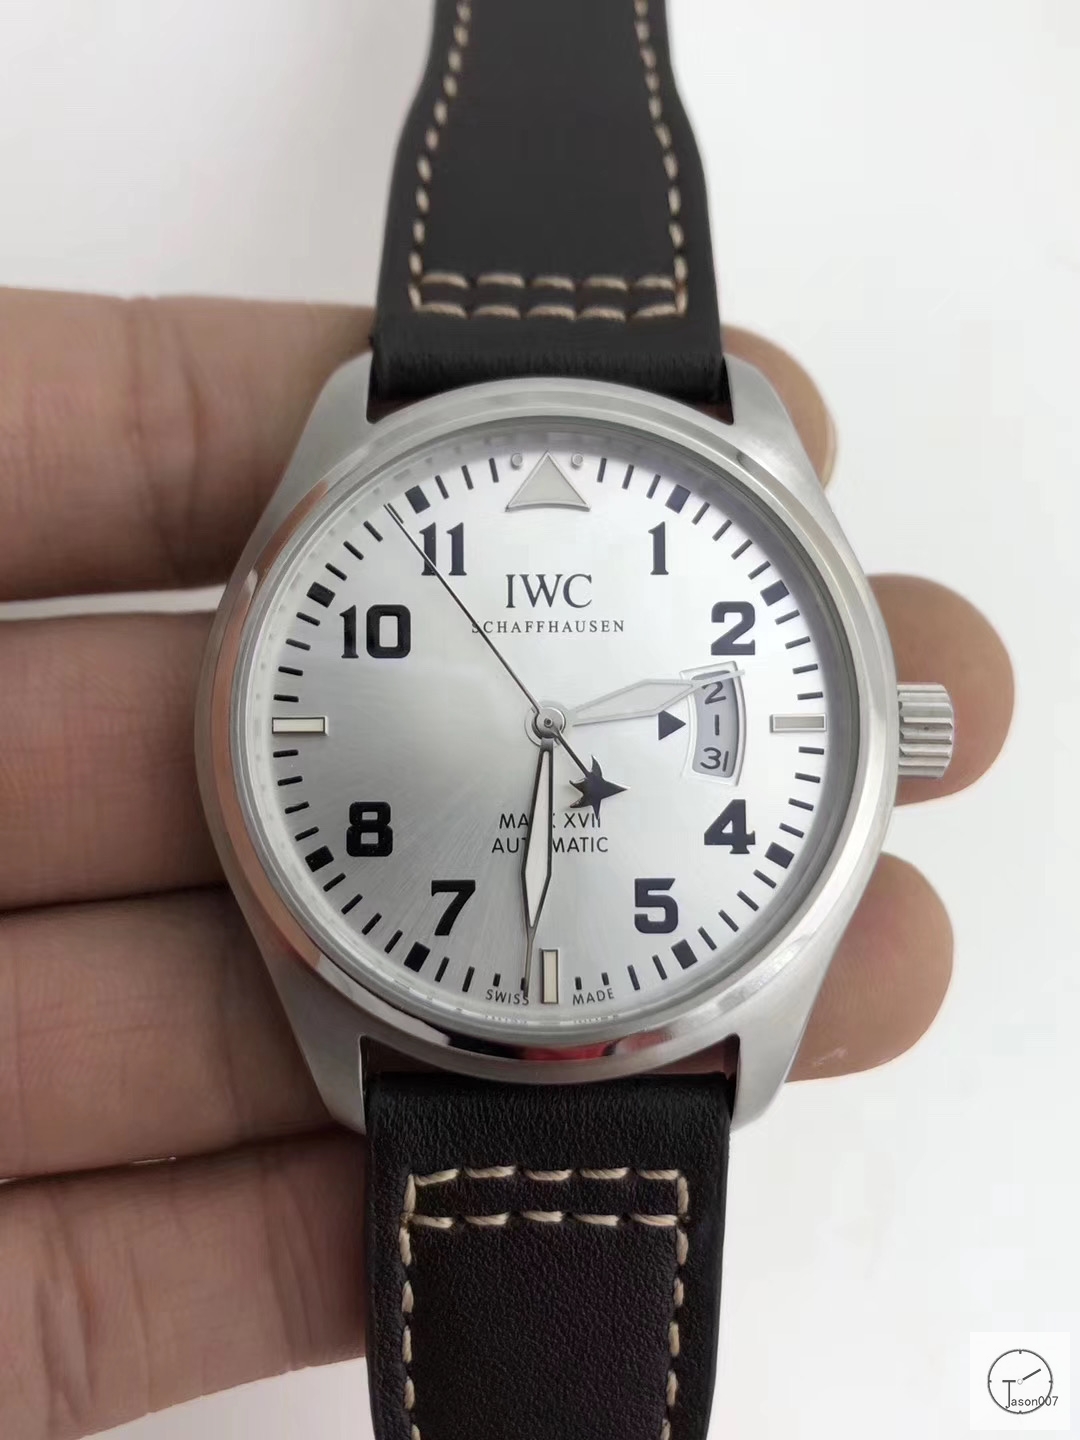 IWC PILOT'S SCHAFFHAUSEN Mark XV2 WATCH AUTOMATIC SPITFIRE AUTOMATIC Mechical IW326803 42MM BLACK DIAL Everose Gold Case Stainless Steel Case Stainless Steel Strap Mens Wristwatches ICW22230560